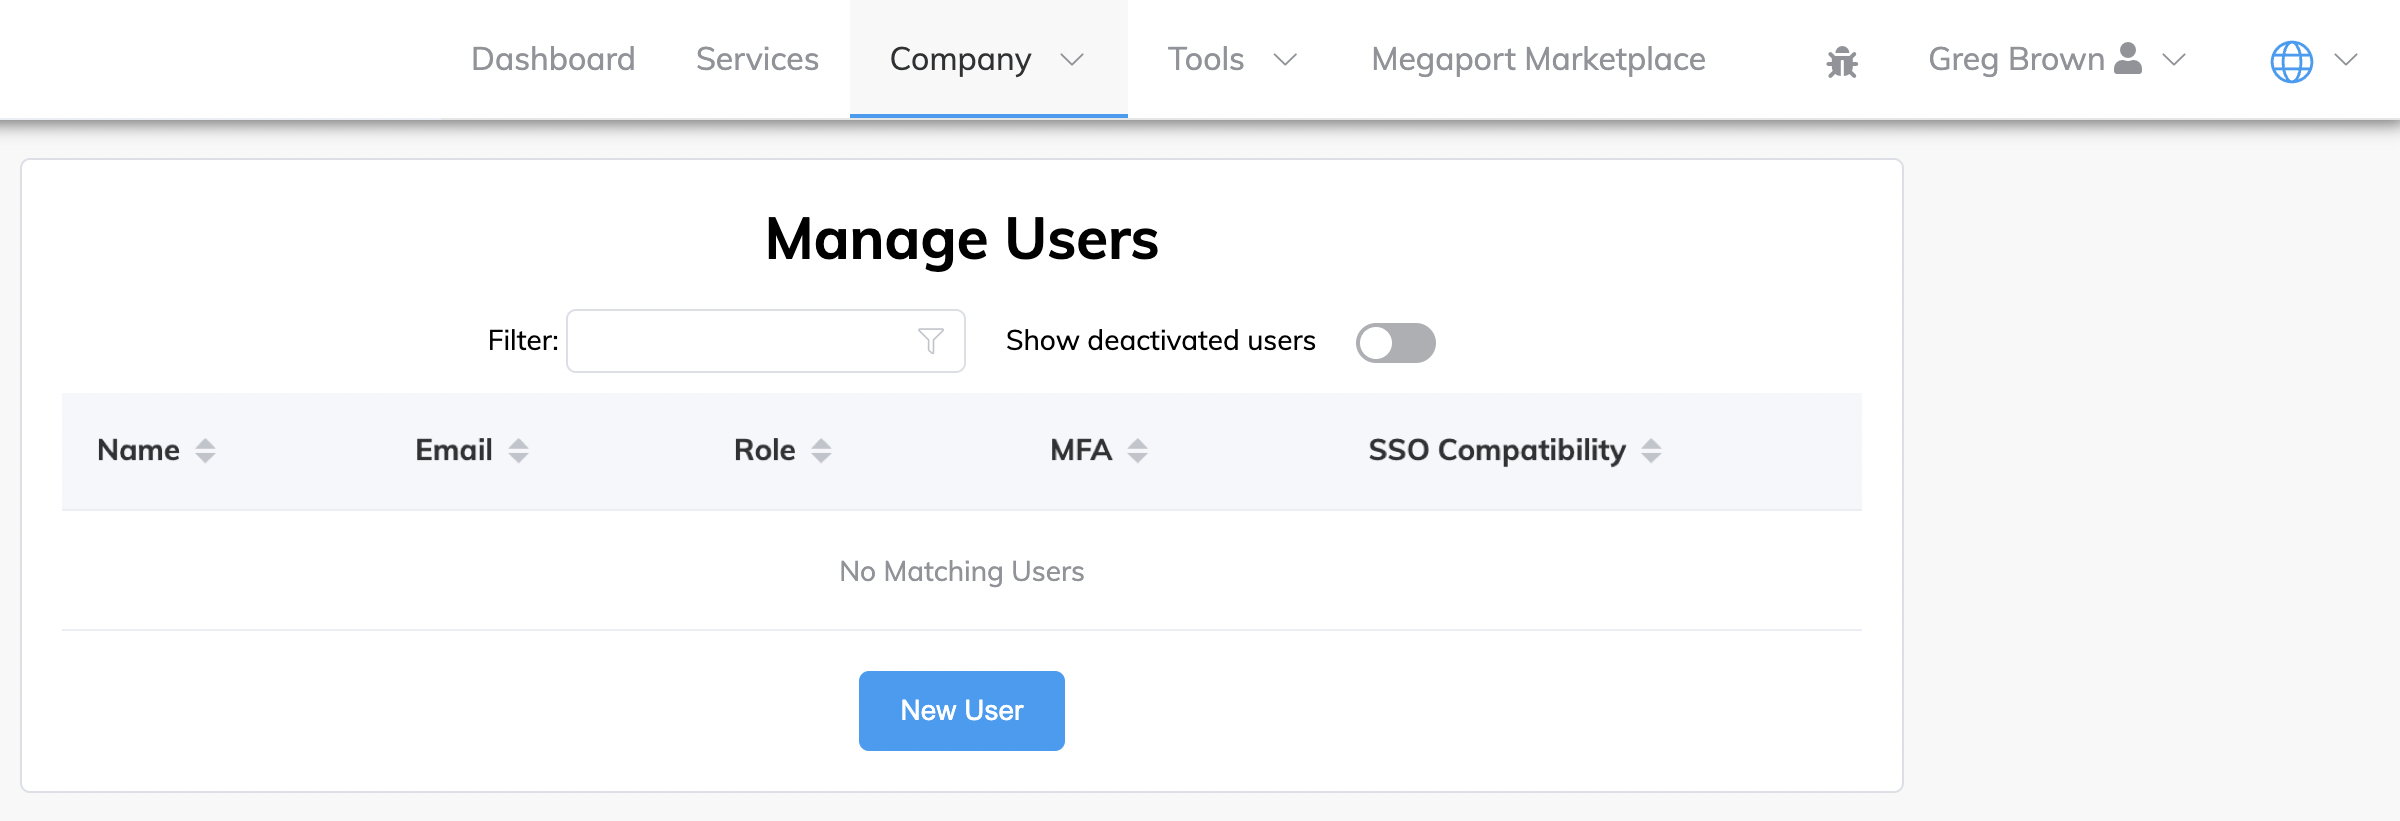 Manage users page